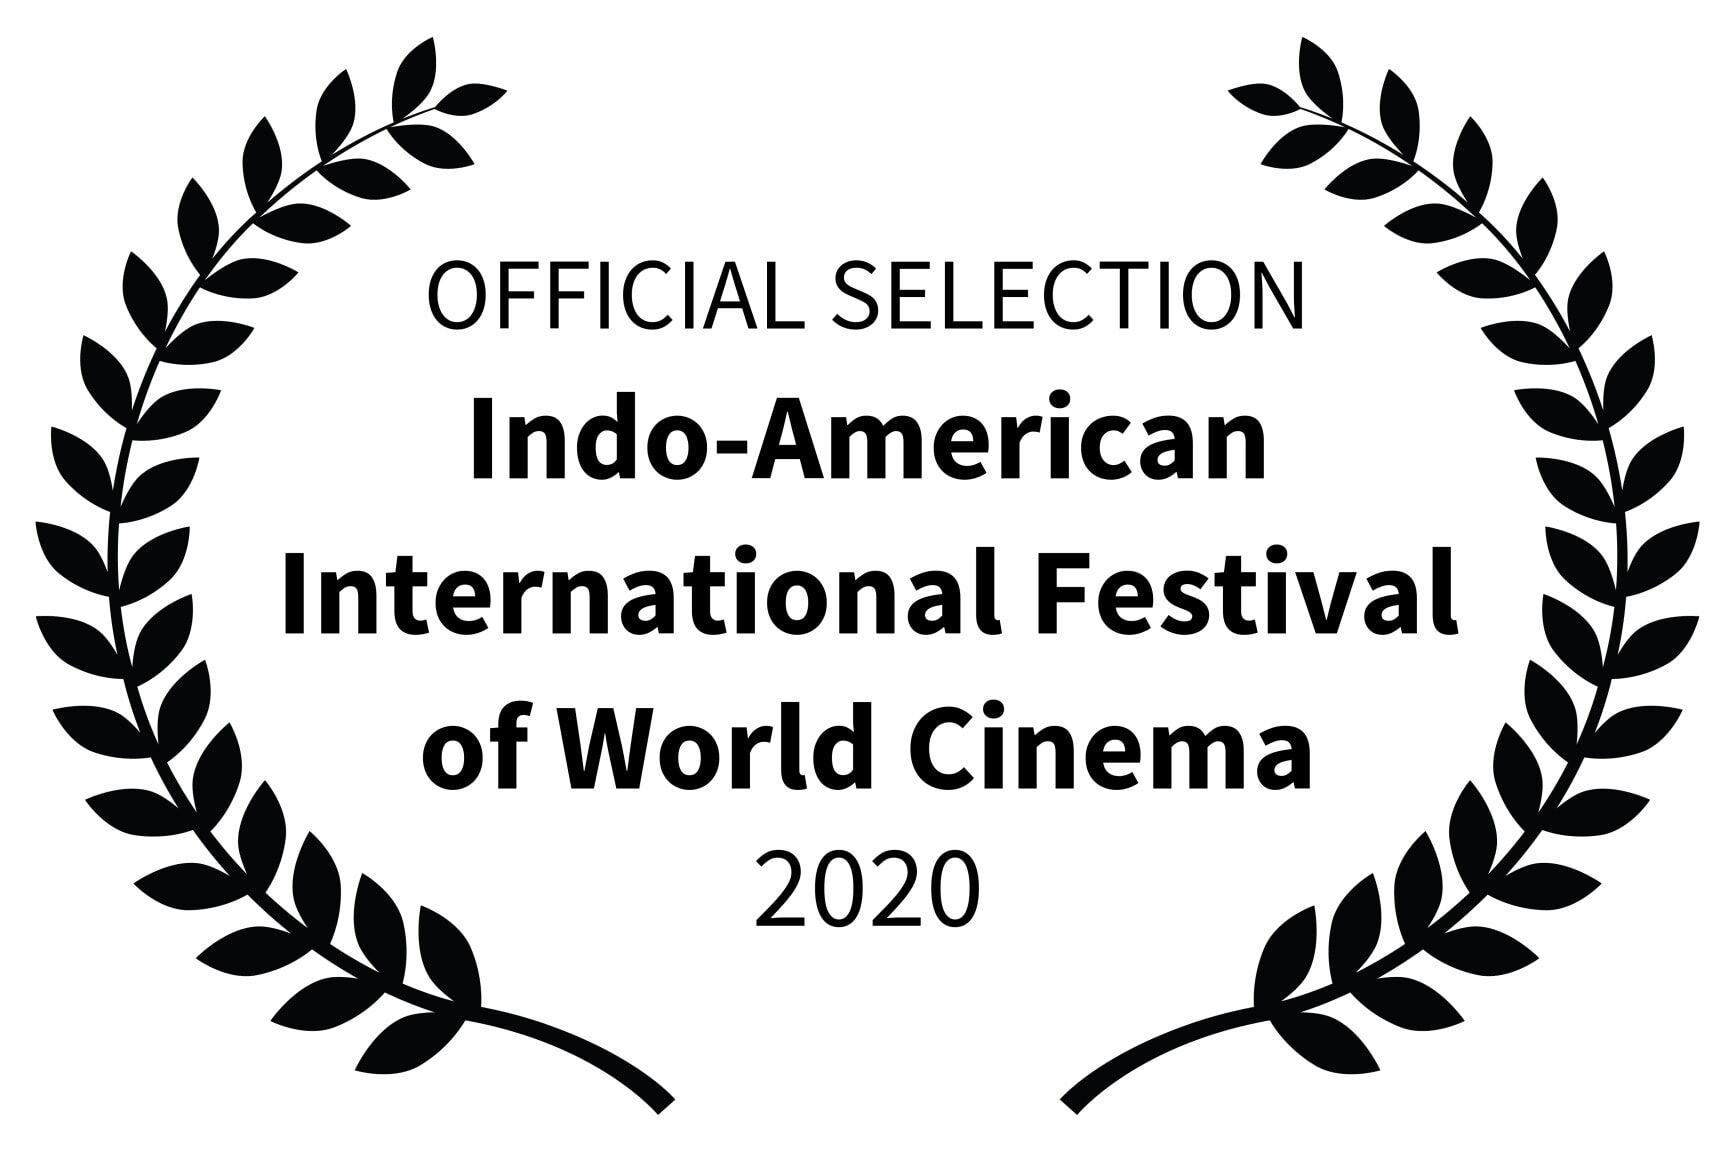 OFFICIAL SELECTION - Indo-American International Festival of World Cinema - 2020